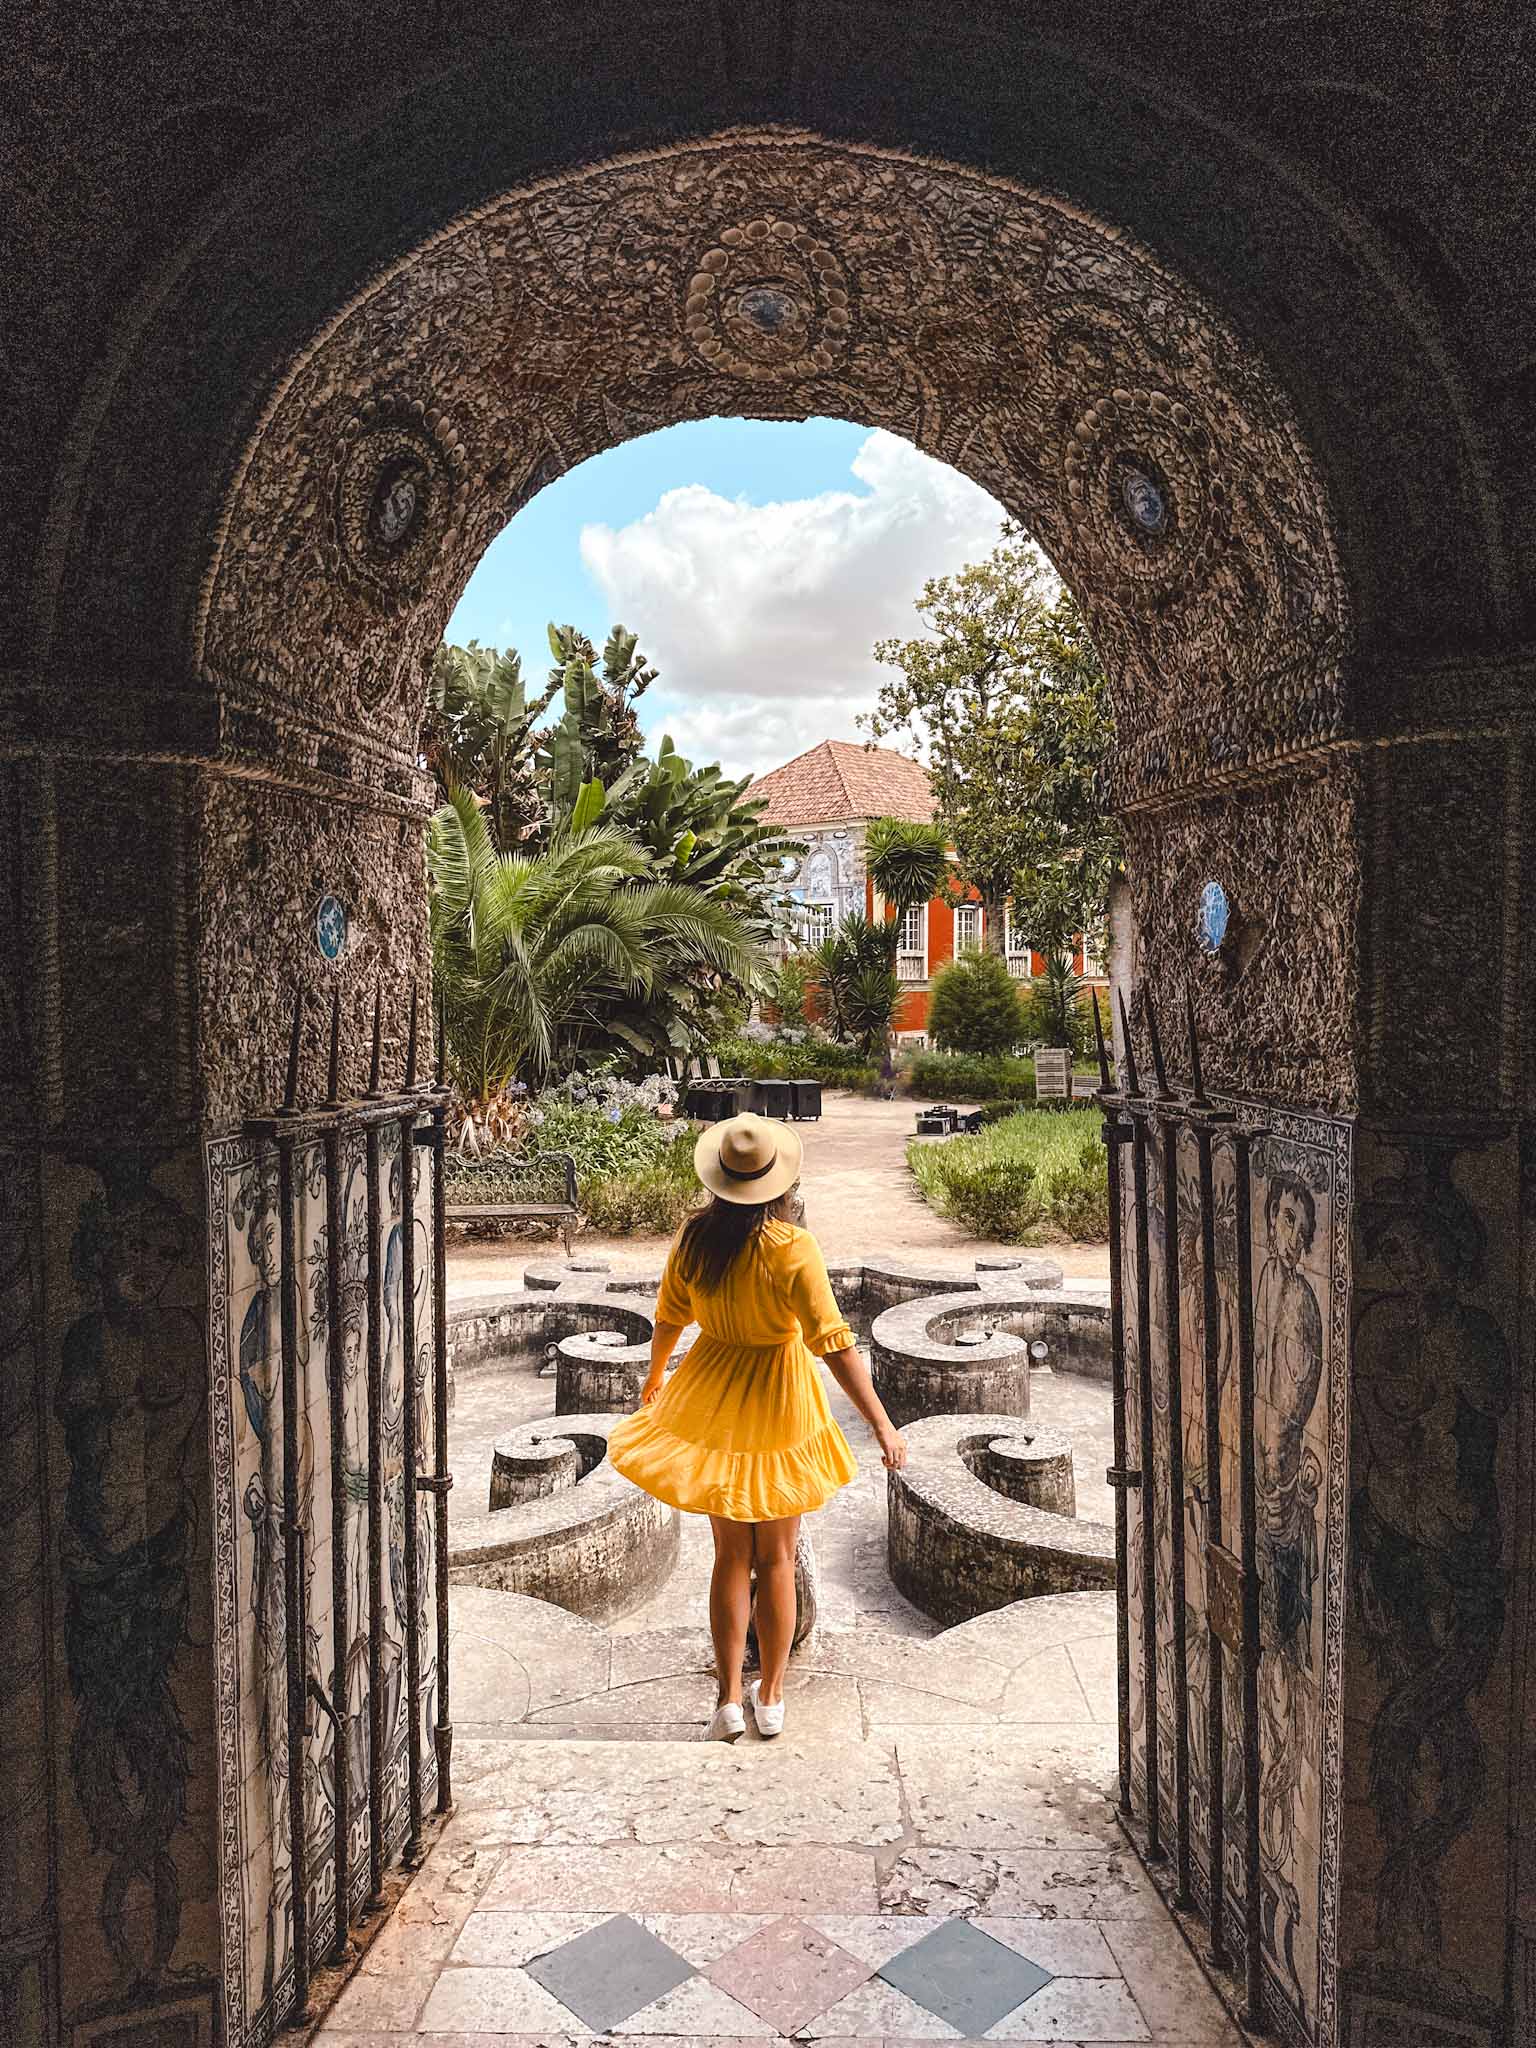 Best Instagram photo spots in Lisbon, Portugal - The Palace of Fronteira